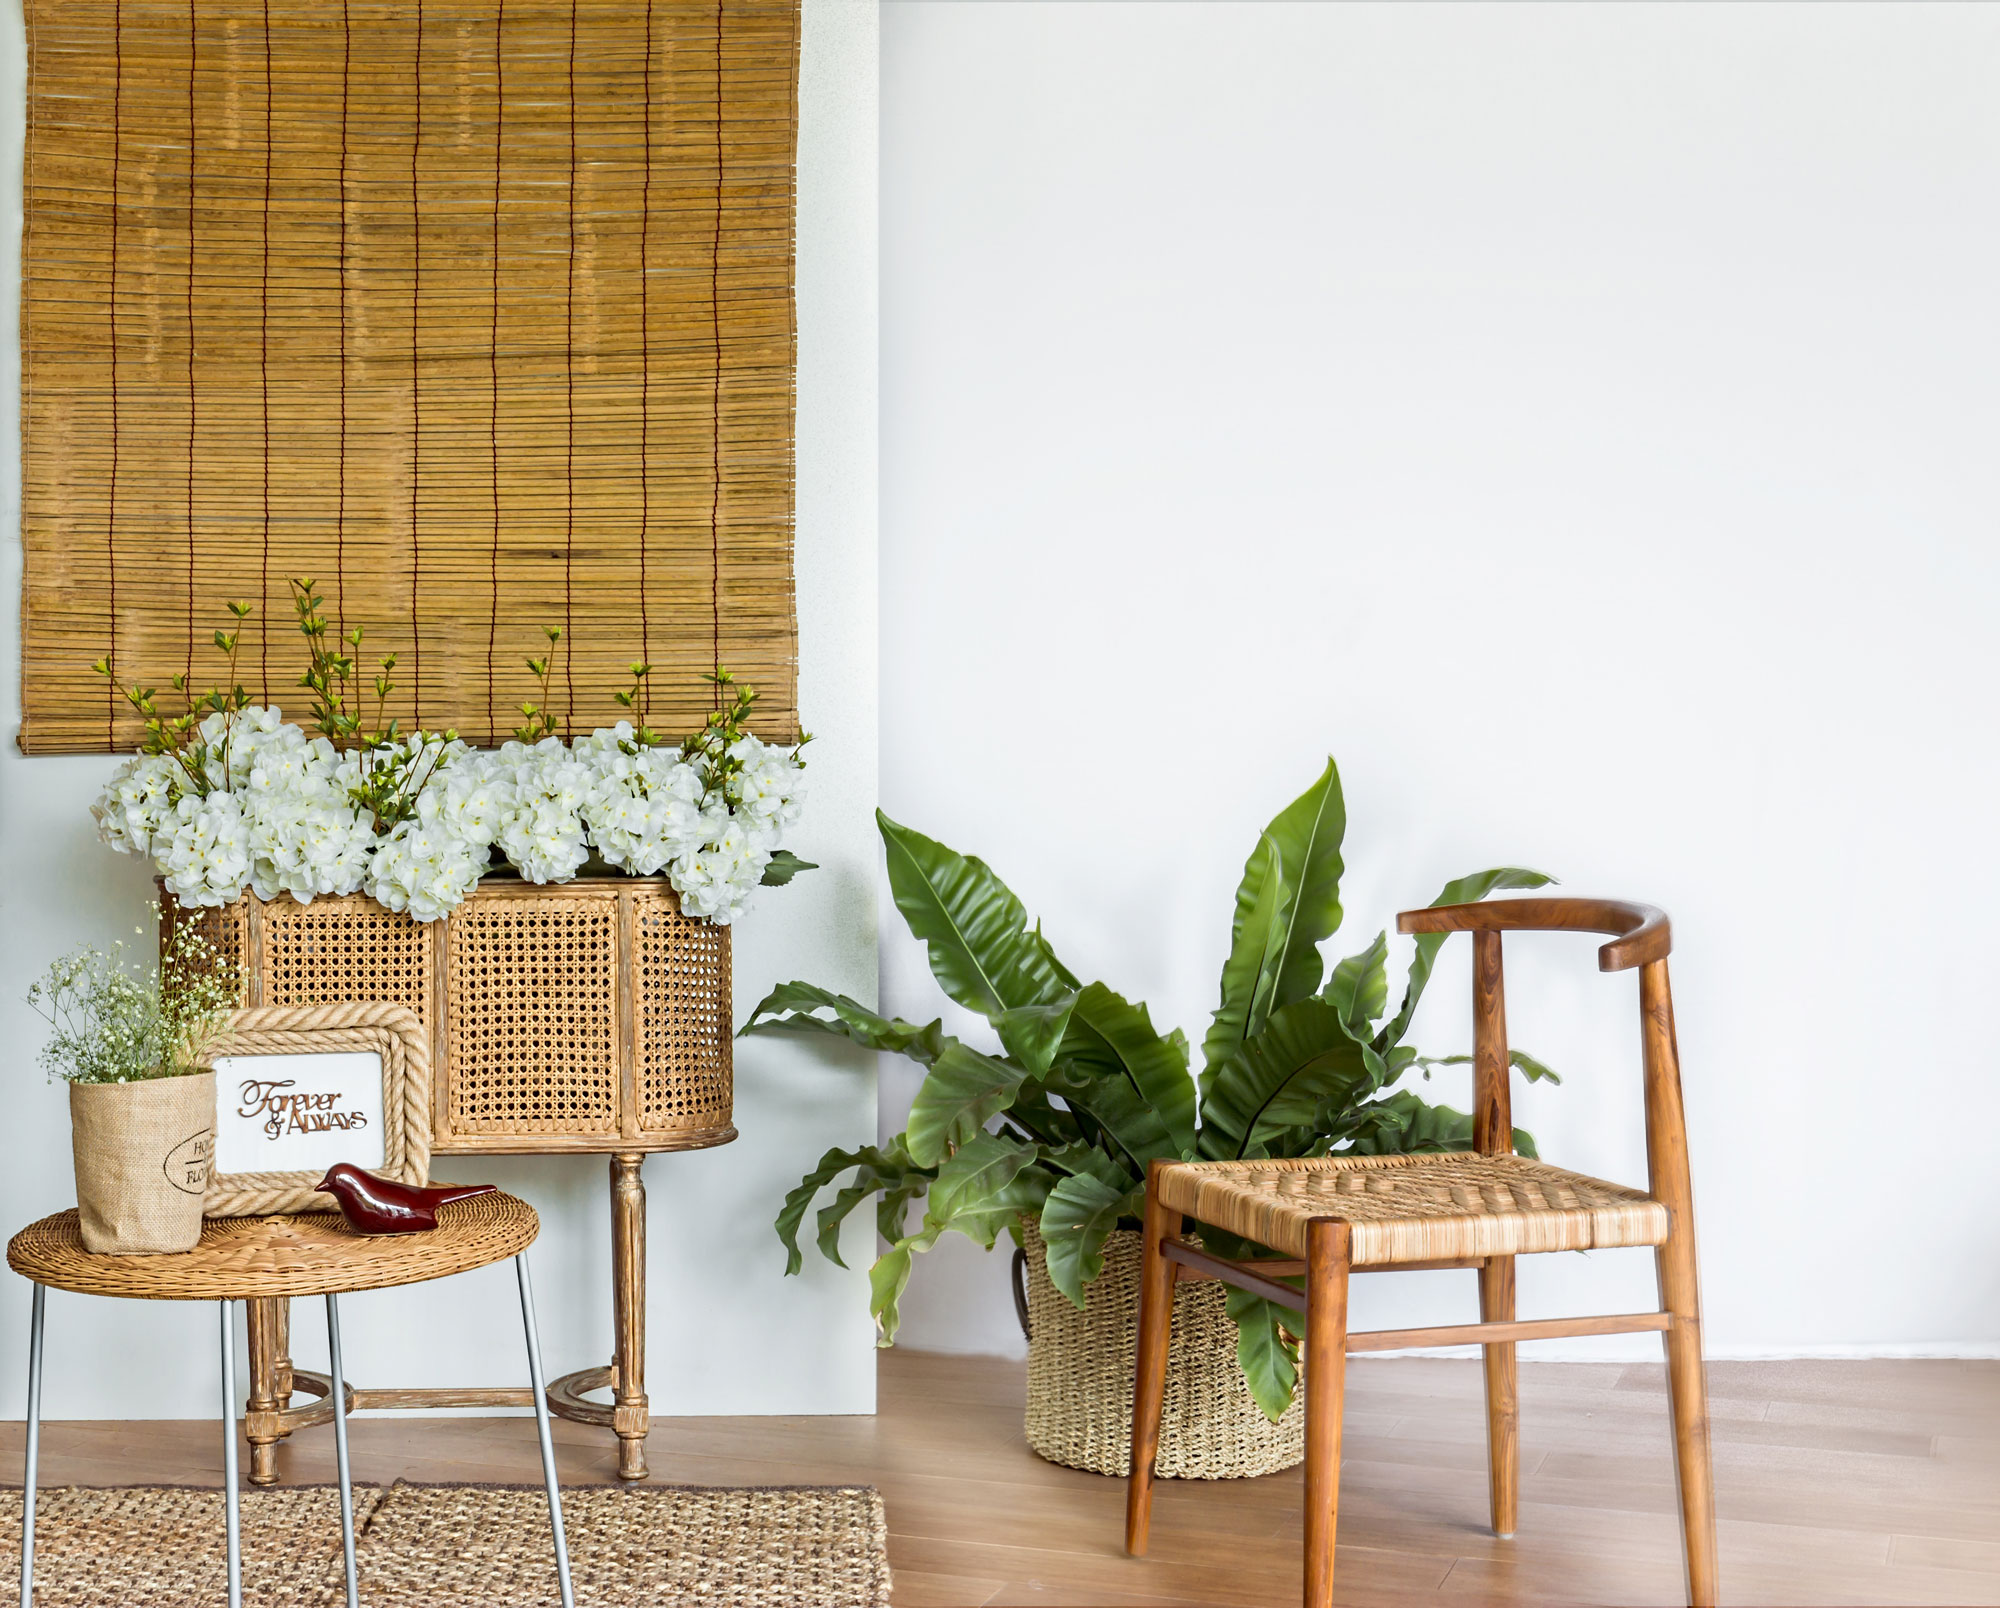 home interiors in a combination of cane, jute and greens